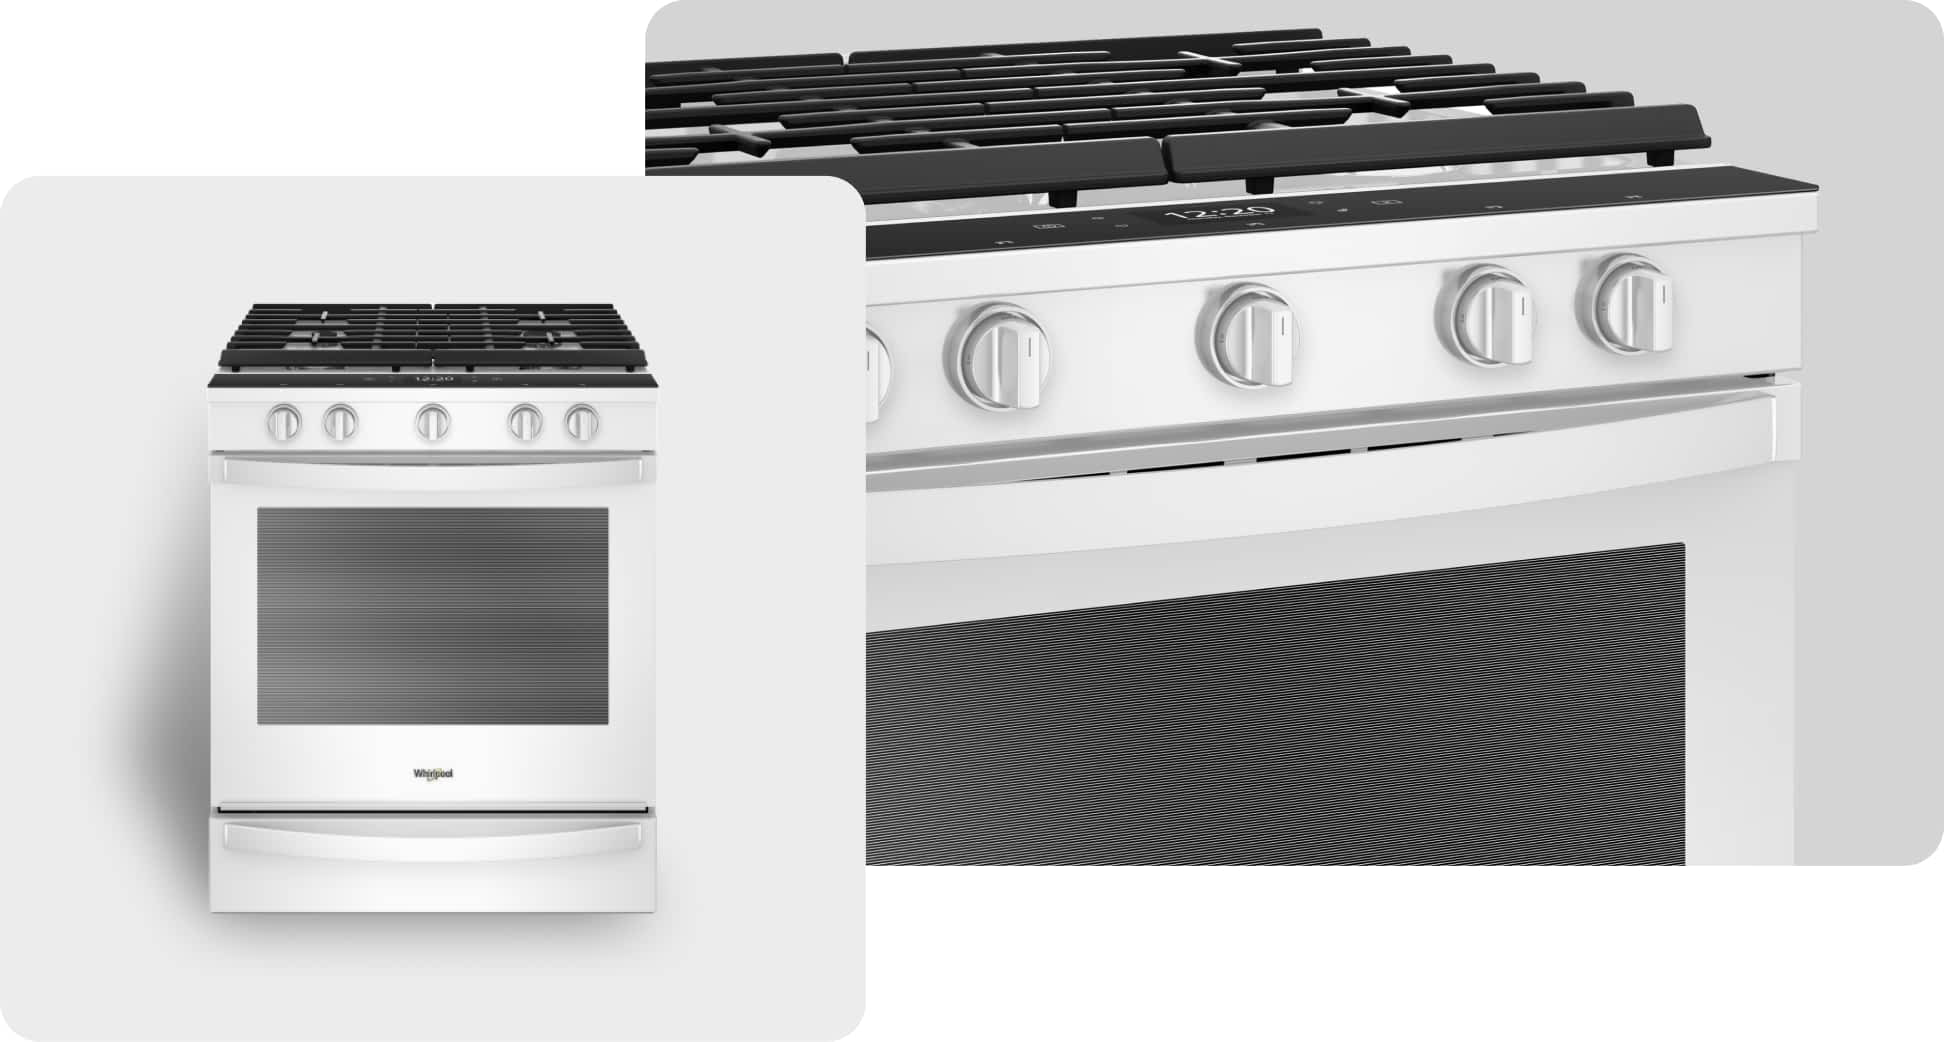 A Whirlpool® Range with a White Finish